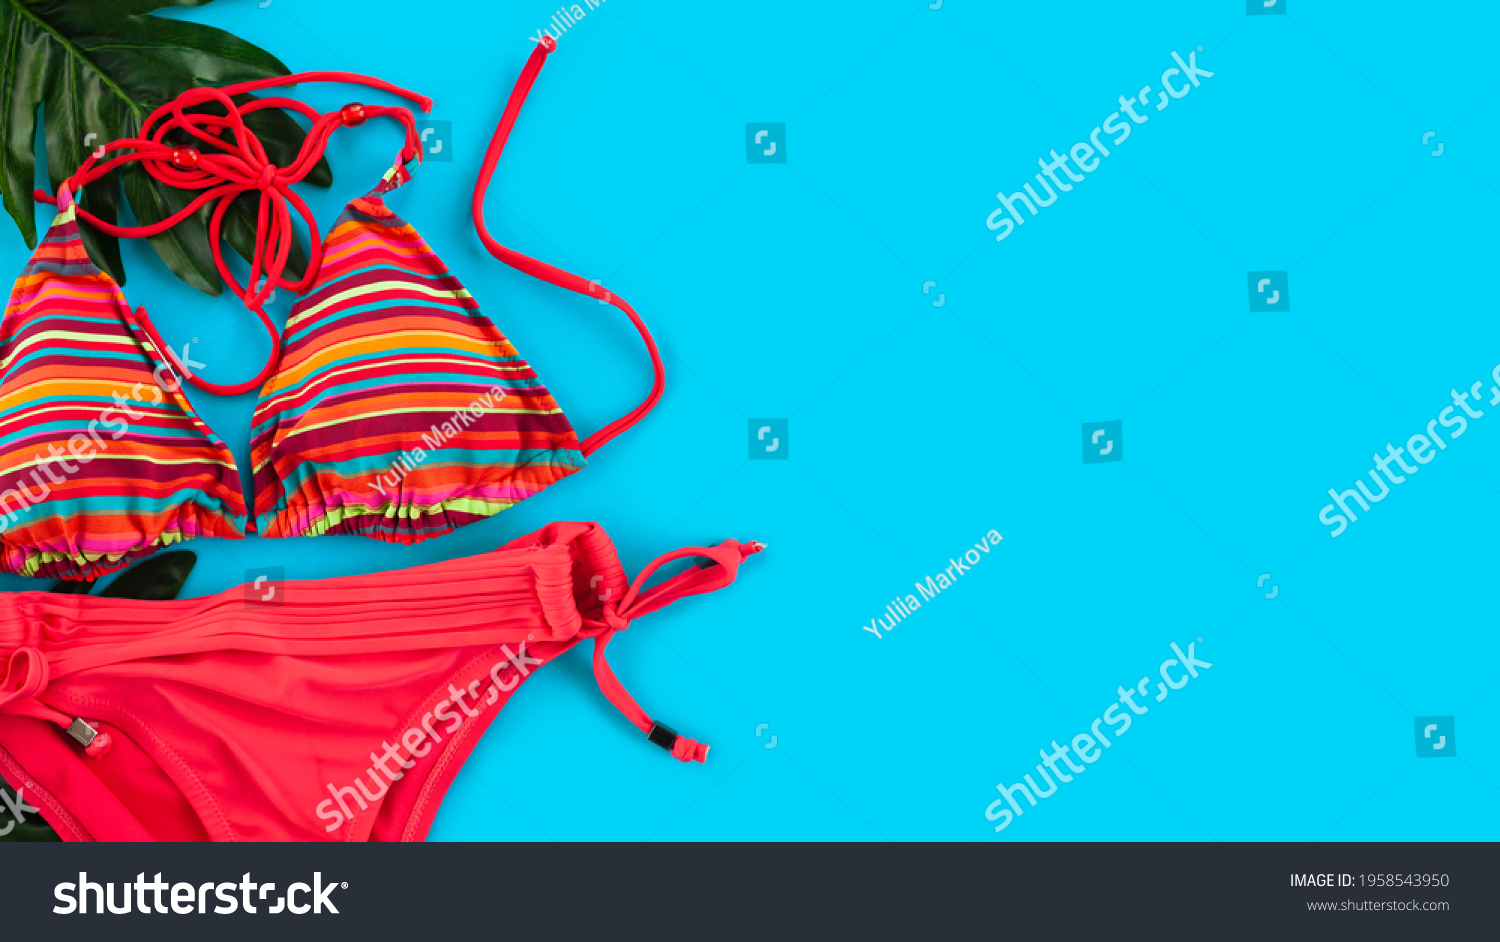 Female red swimsuit on blue background . Summer vacation concept. Flat lay. Top view. Copy space. #1958543950